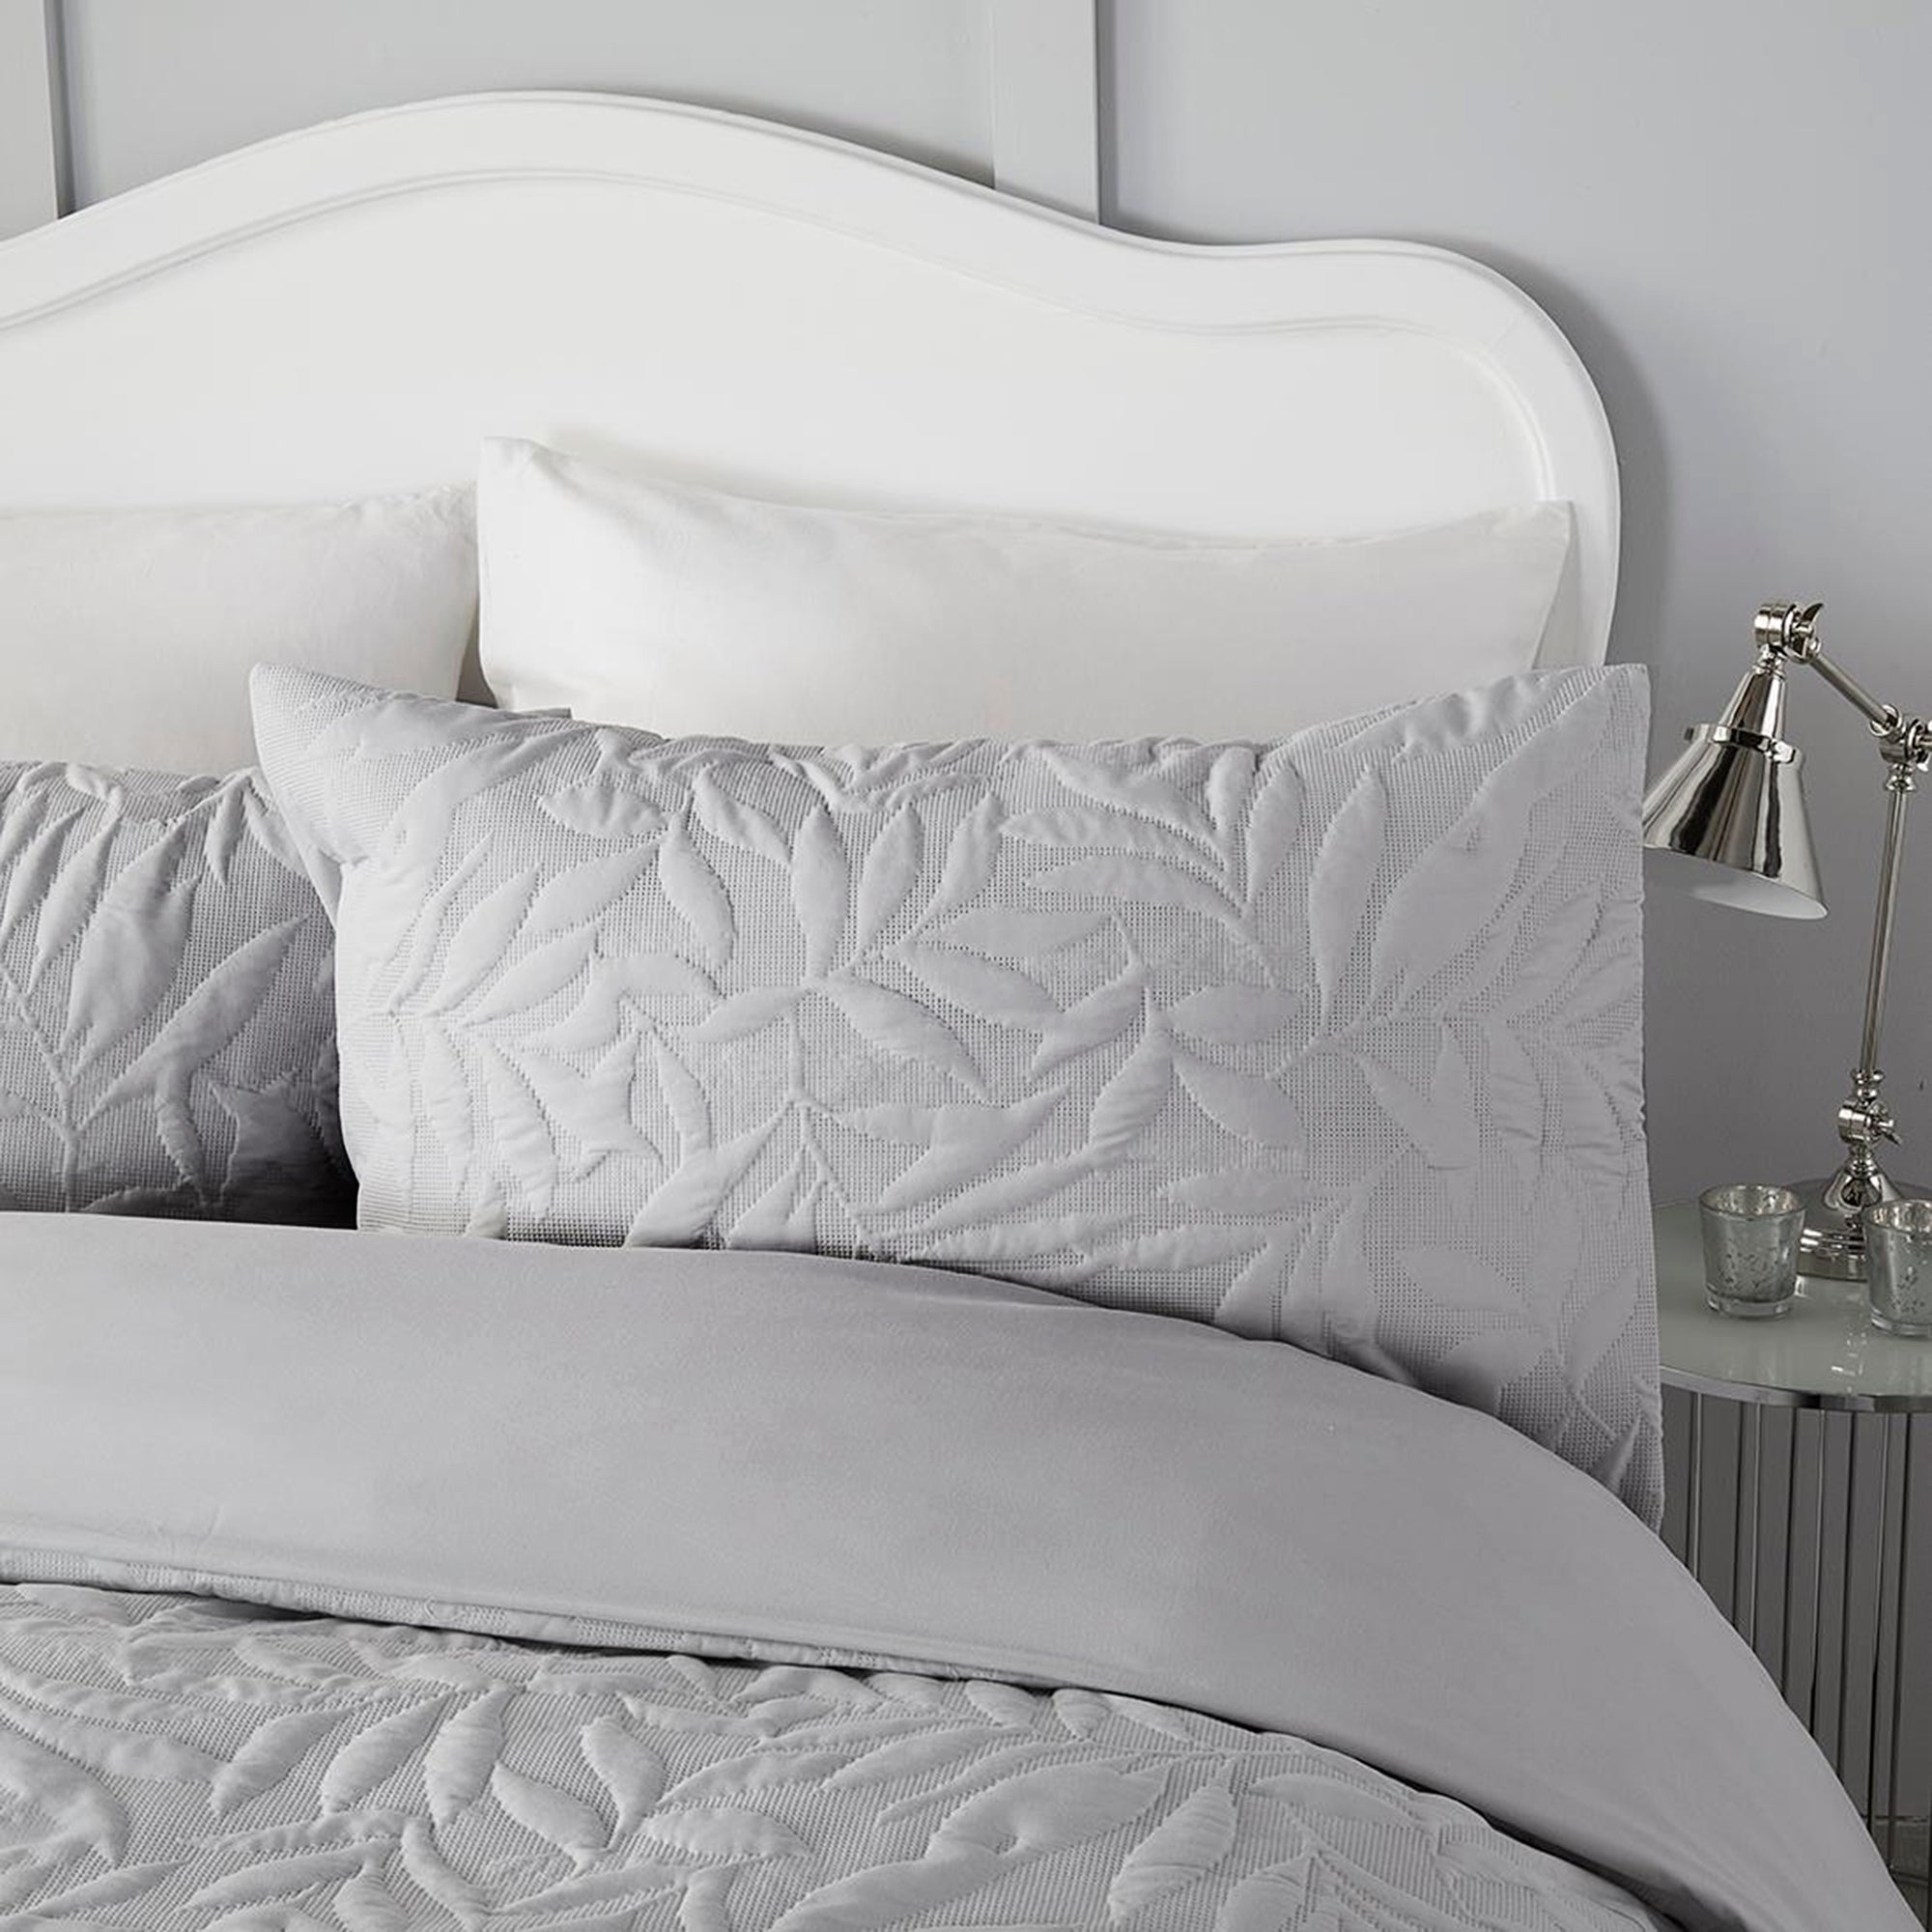 Luana - Pinsonic Duvet Cover Set in Silver - by Serene